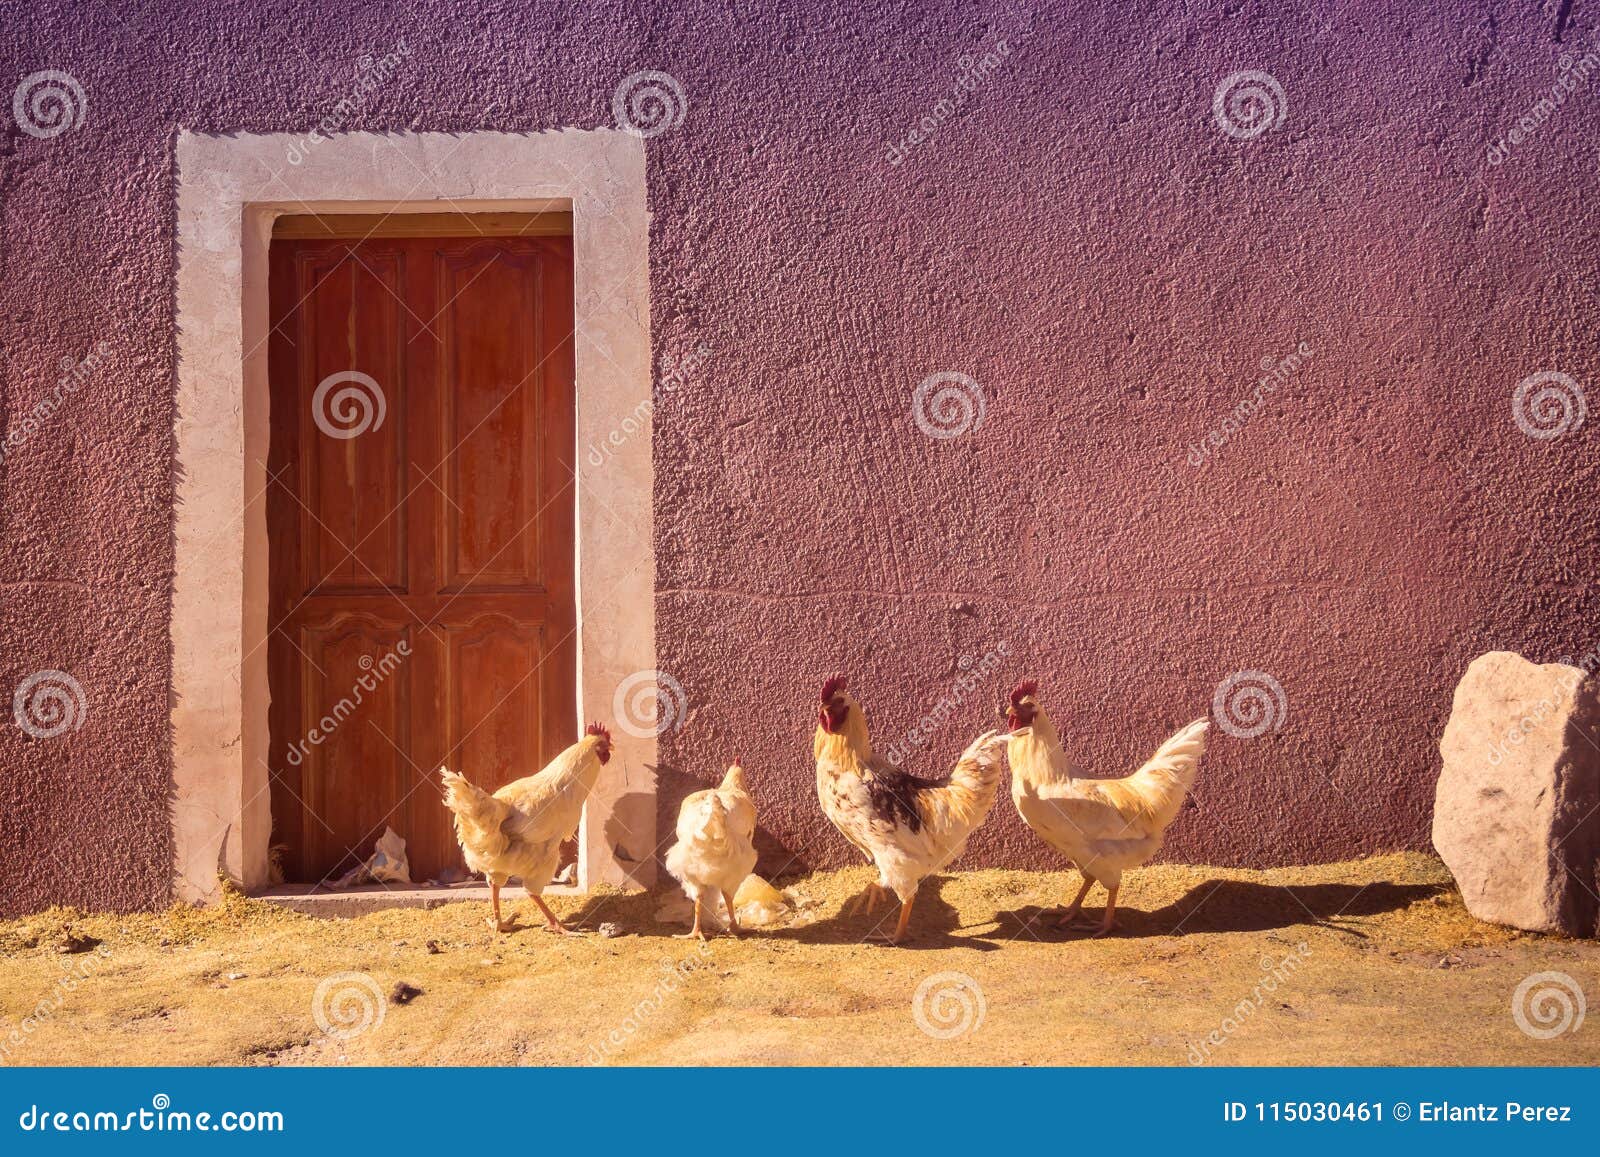 hens and chickens in front of a rural house in bolivia